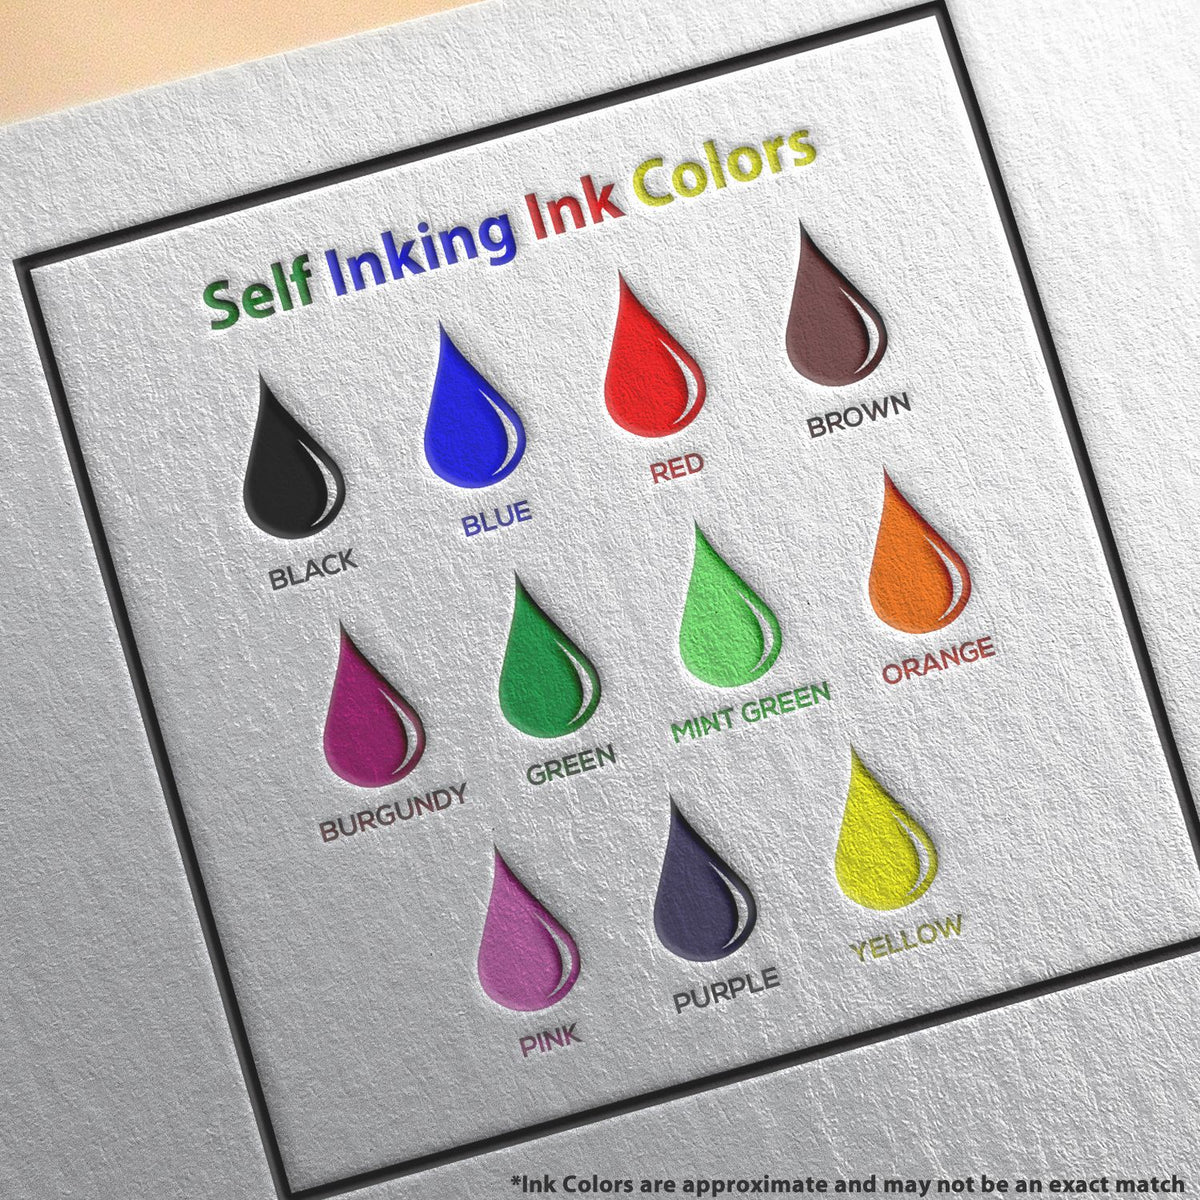 A picture showing the different ink colors or hues available for the Self-Inking North Carolina Landscape Architect Stamp product.